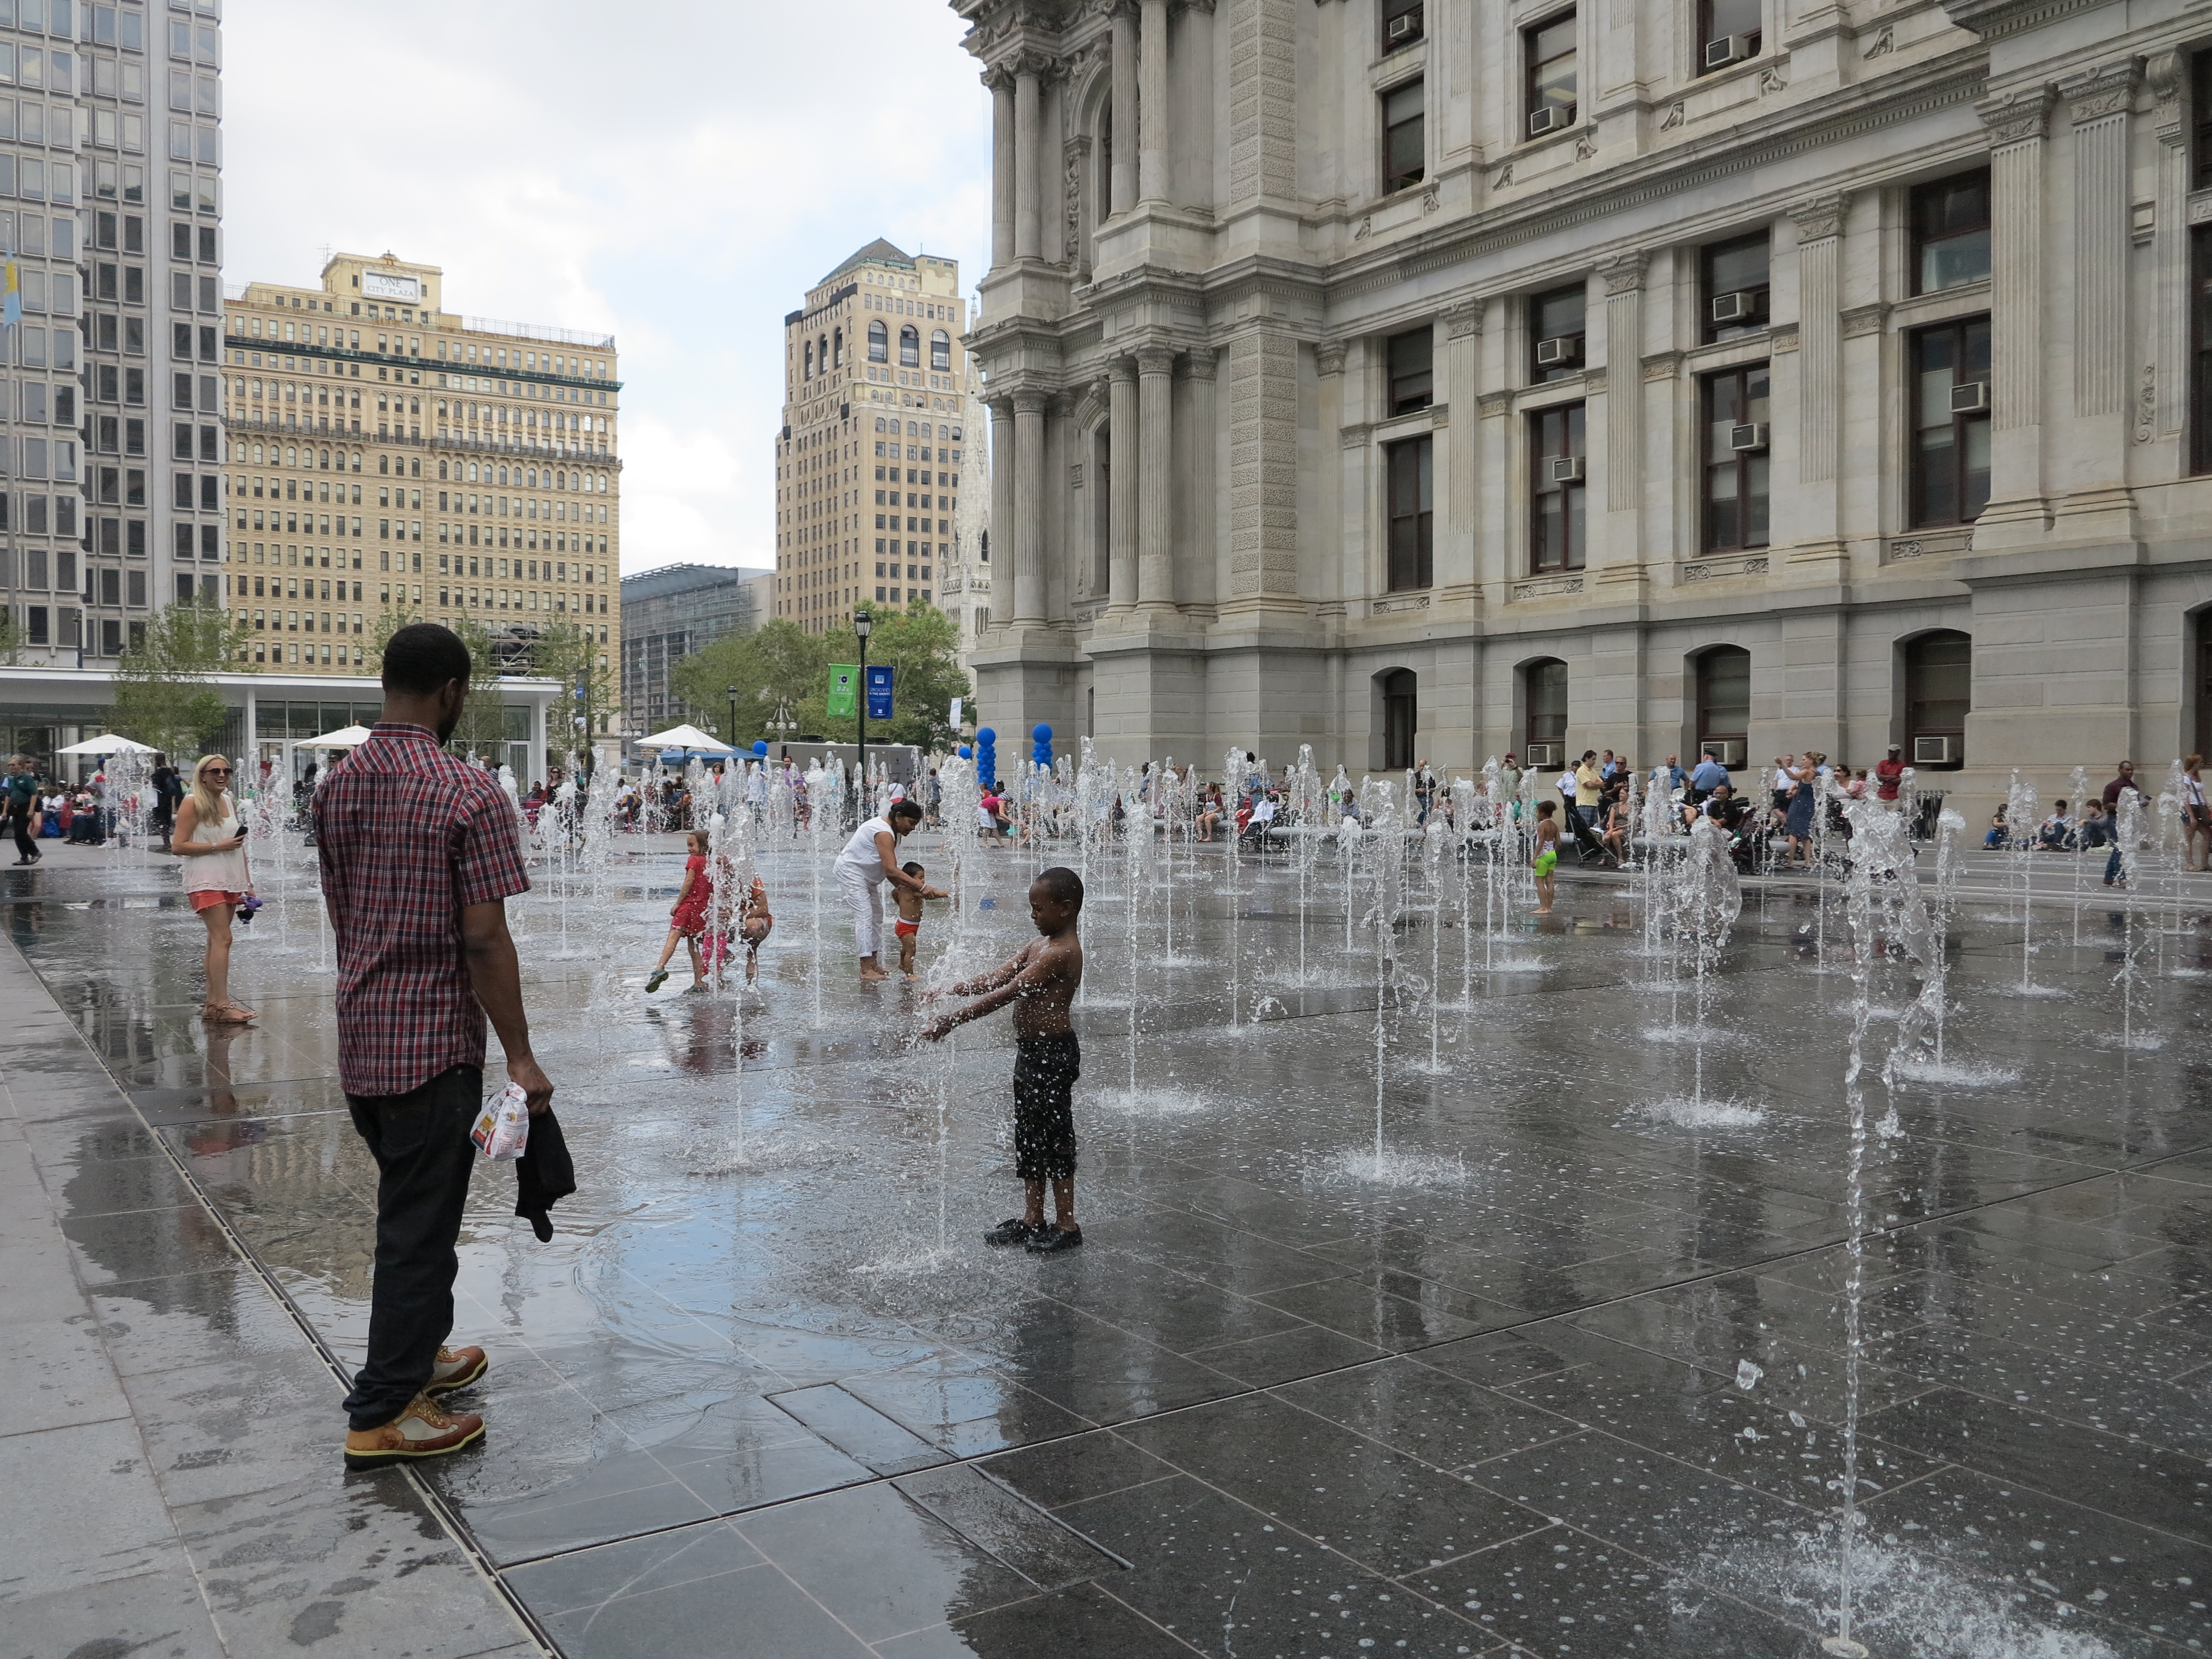 Dilworth Park fountains meant for play on hot days